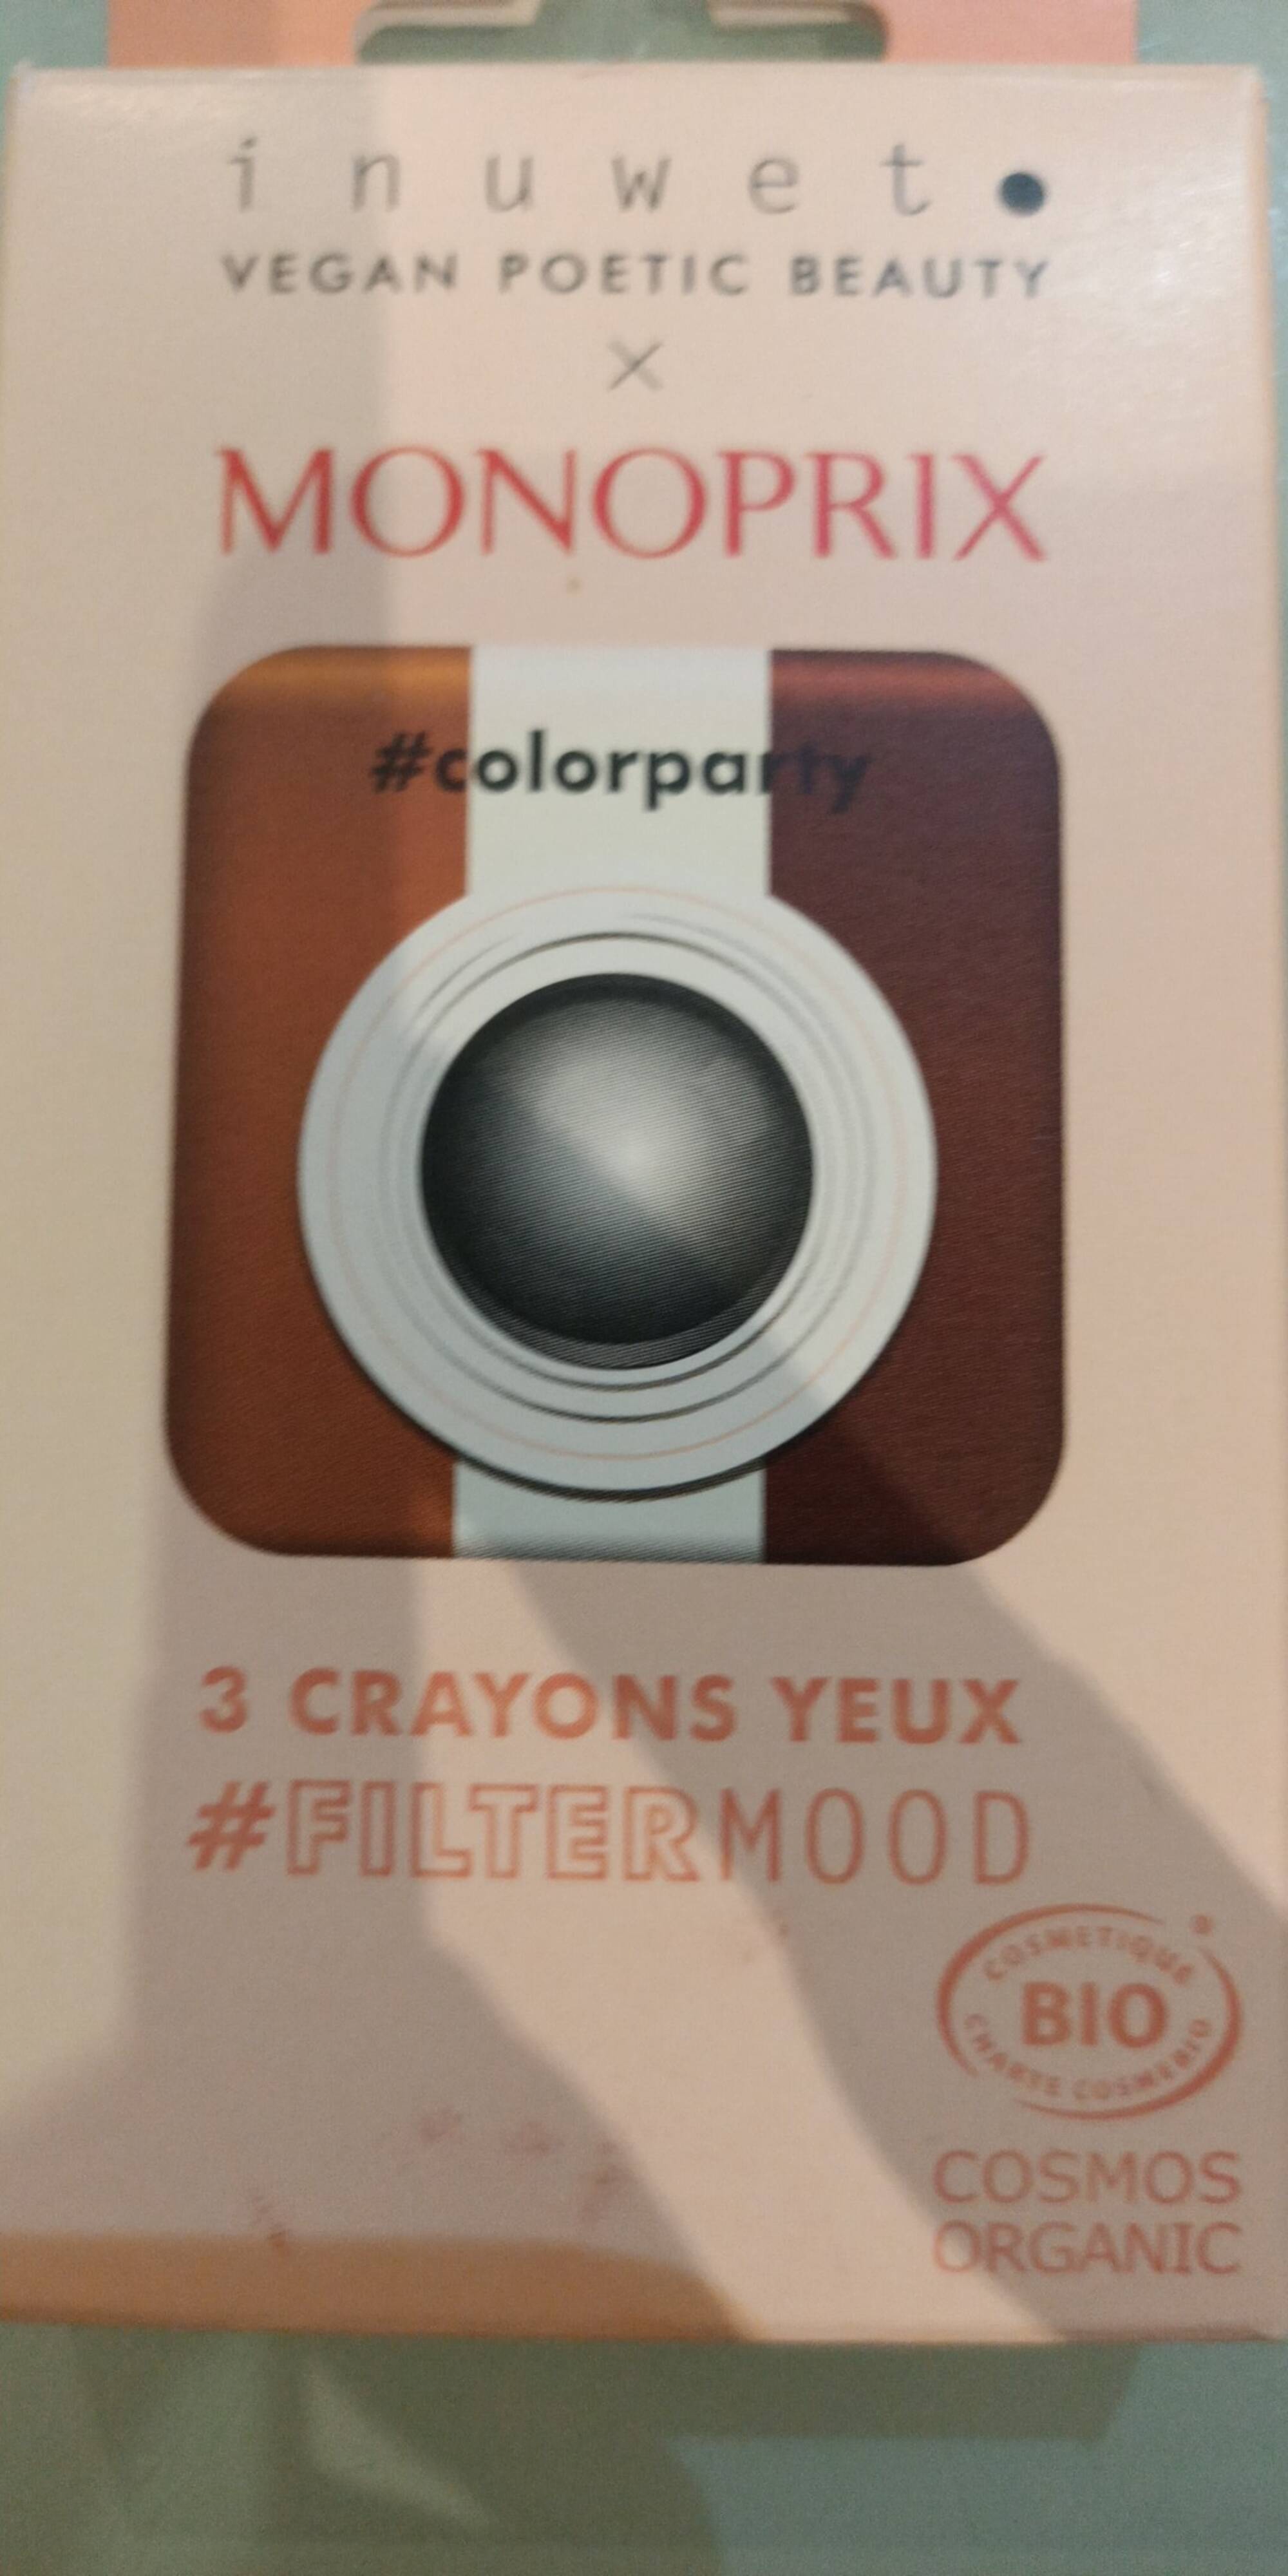 MONOPRIX - #Colorparty - 3 Crayons yeux